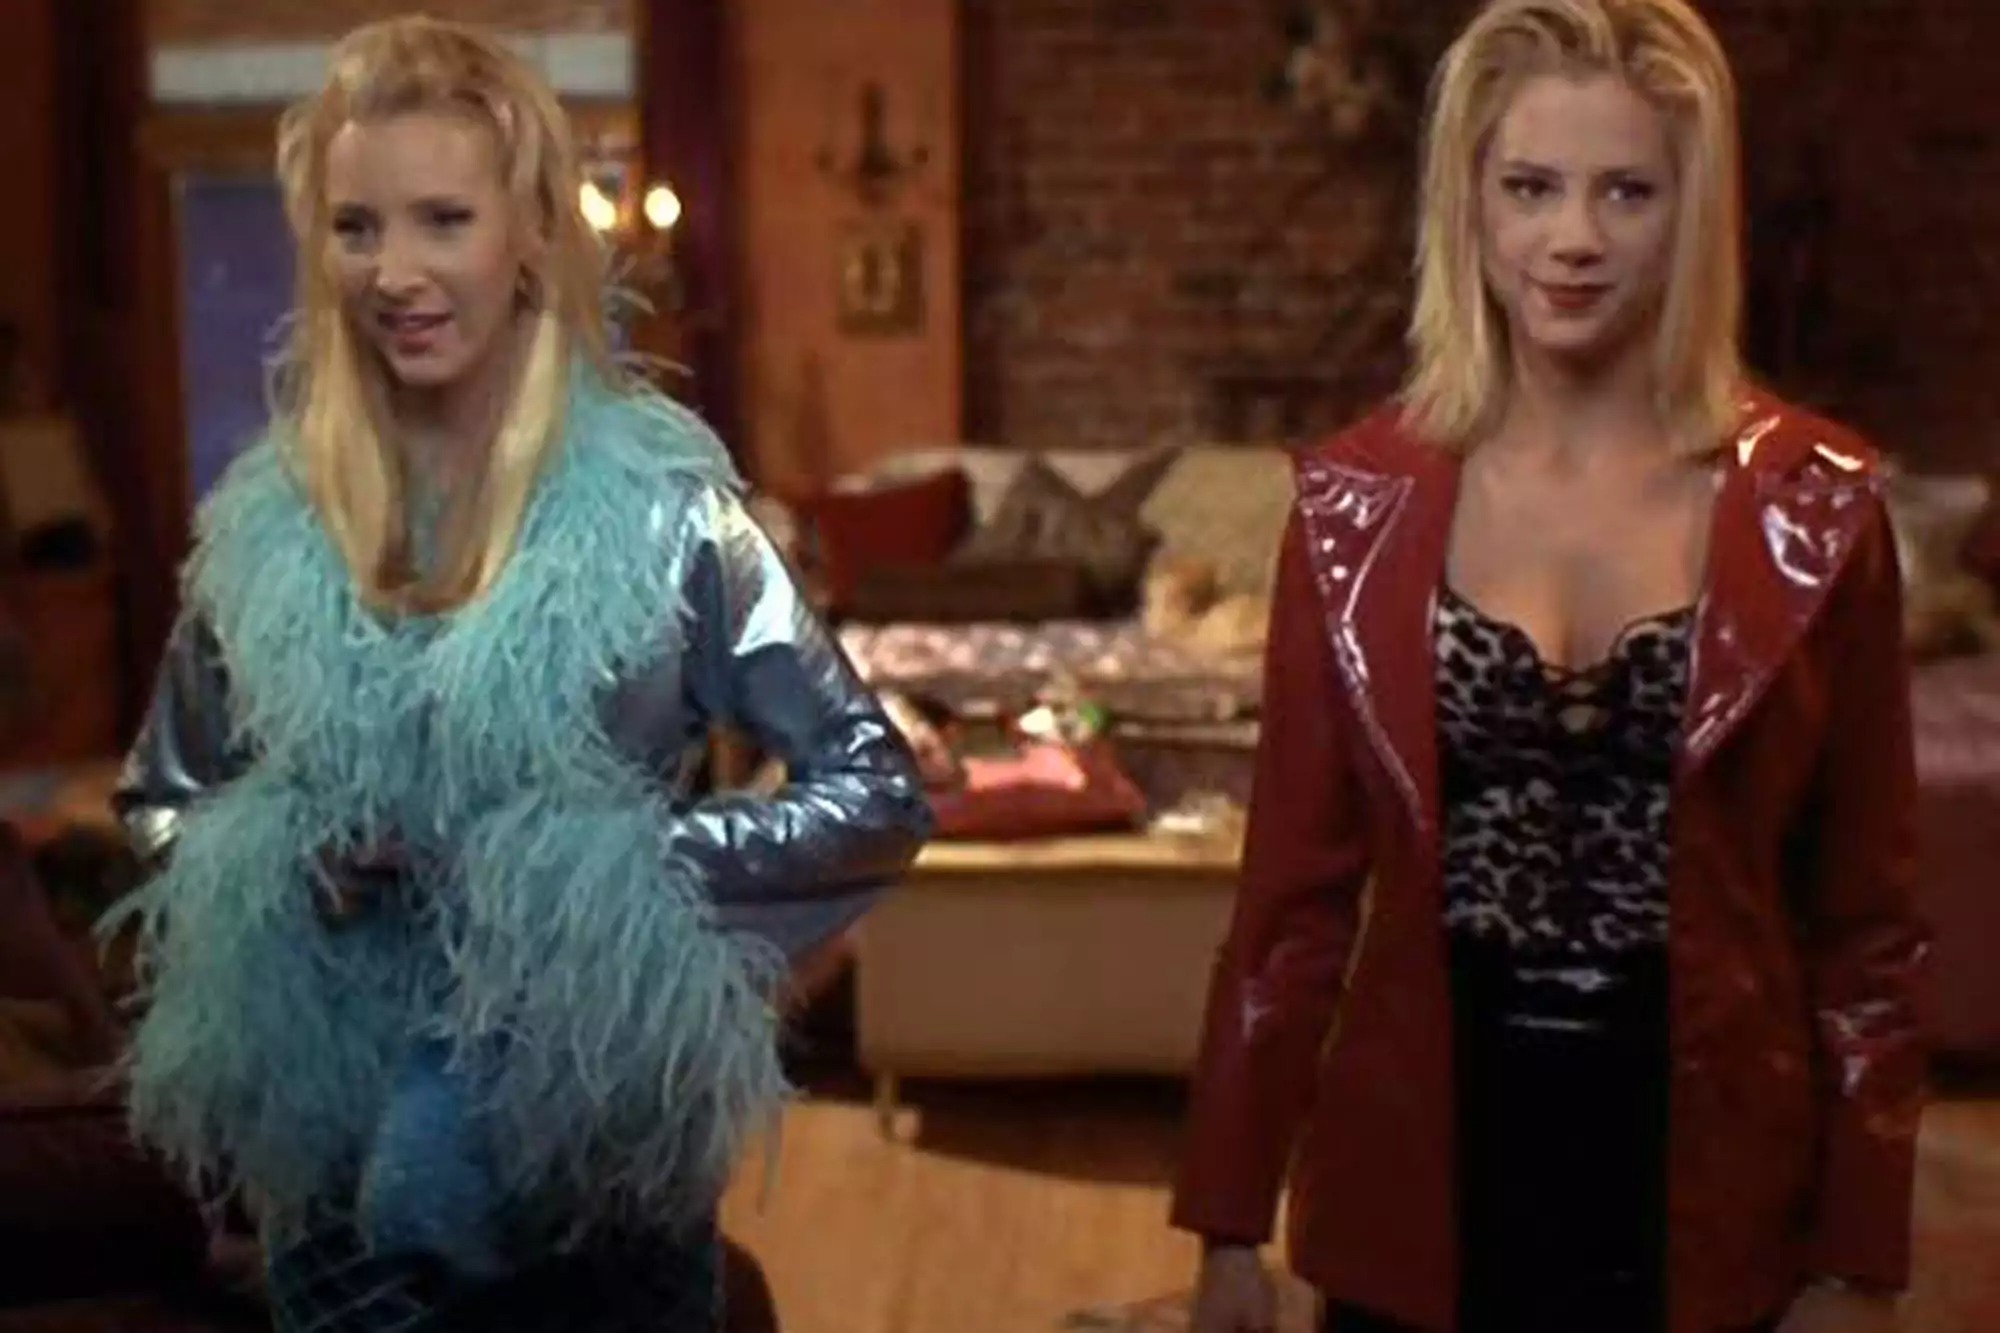 The distinctive style of the duo Romy and Michele